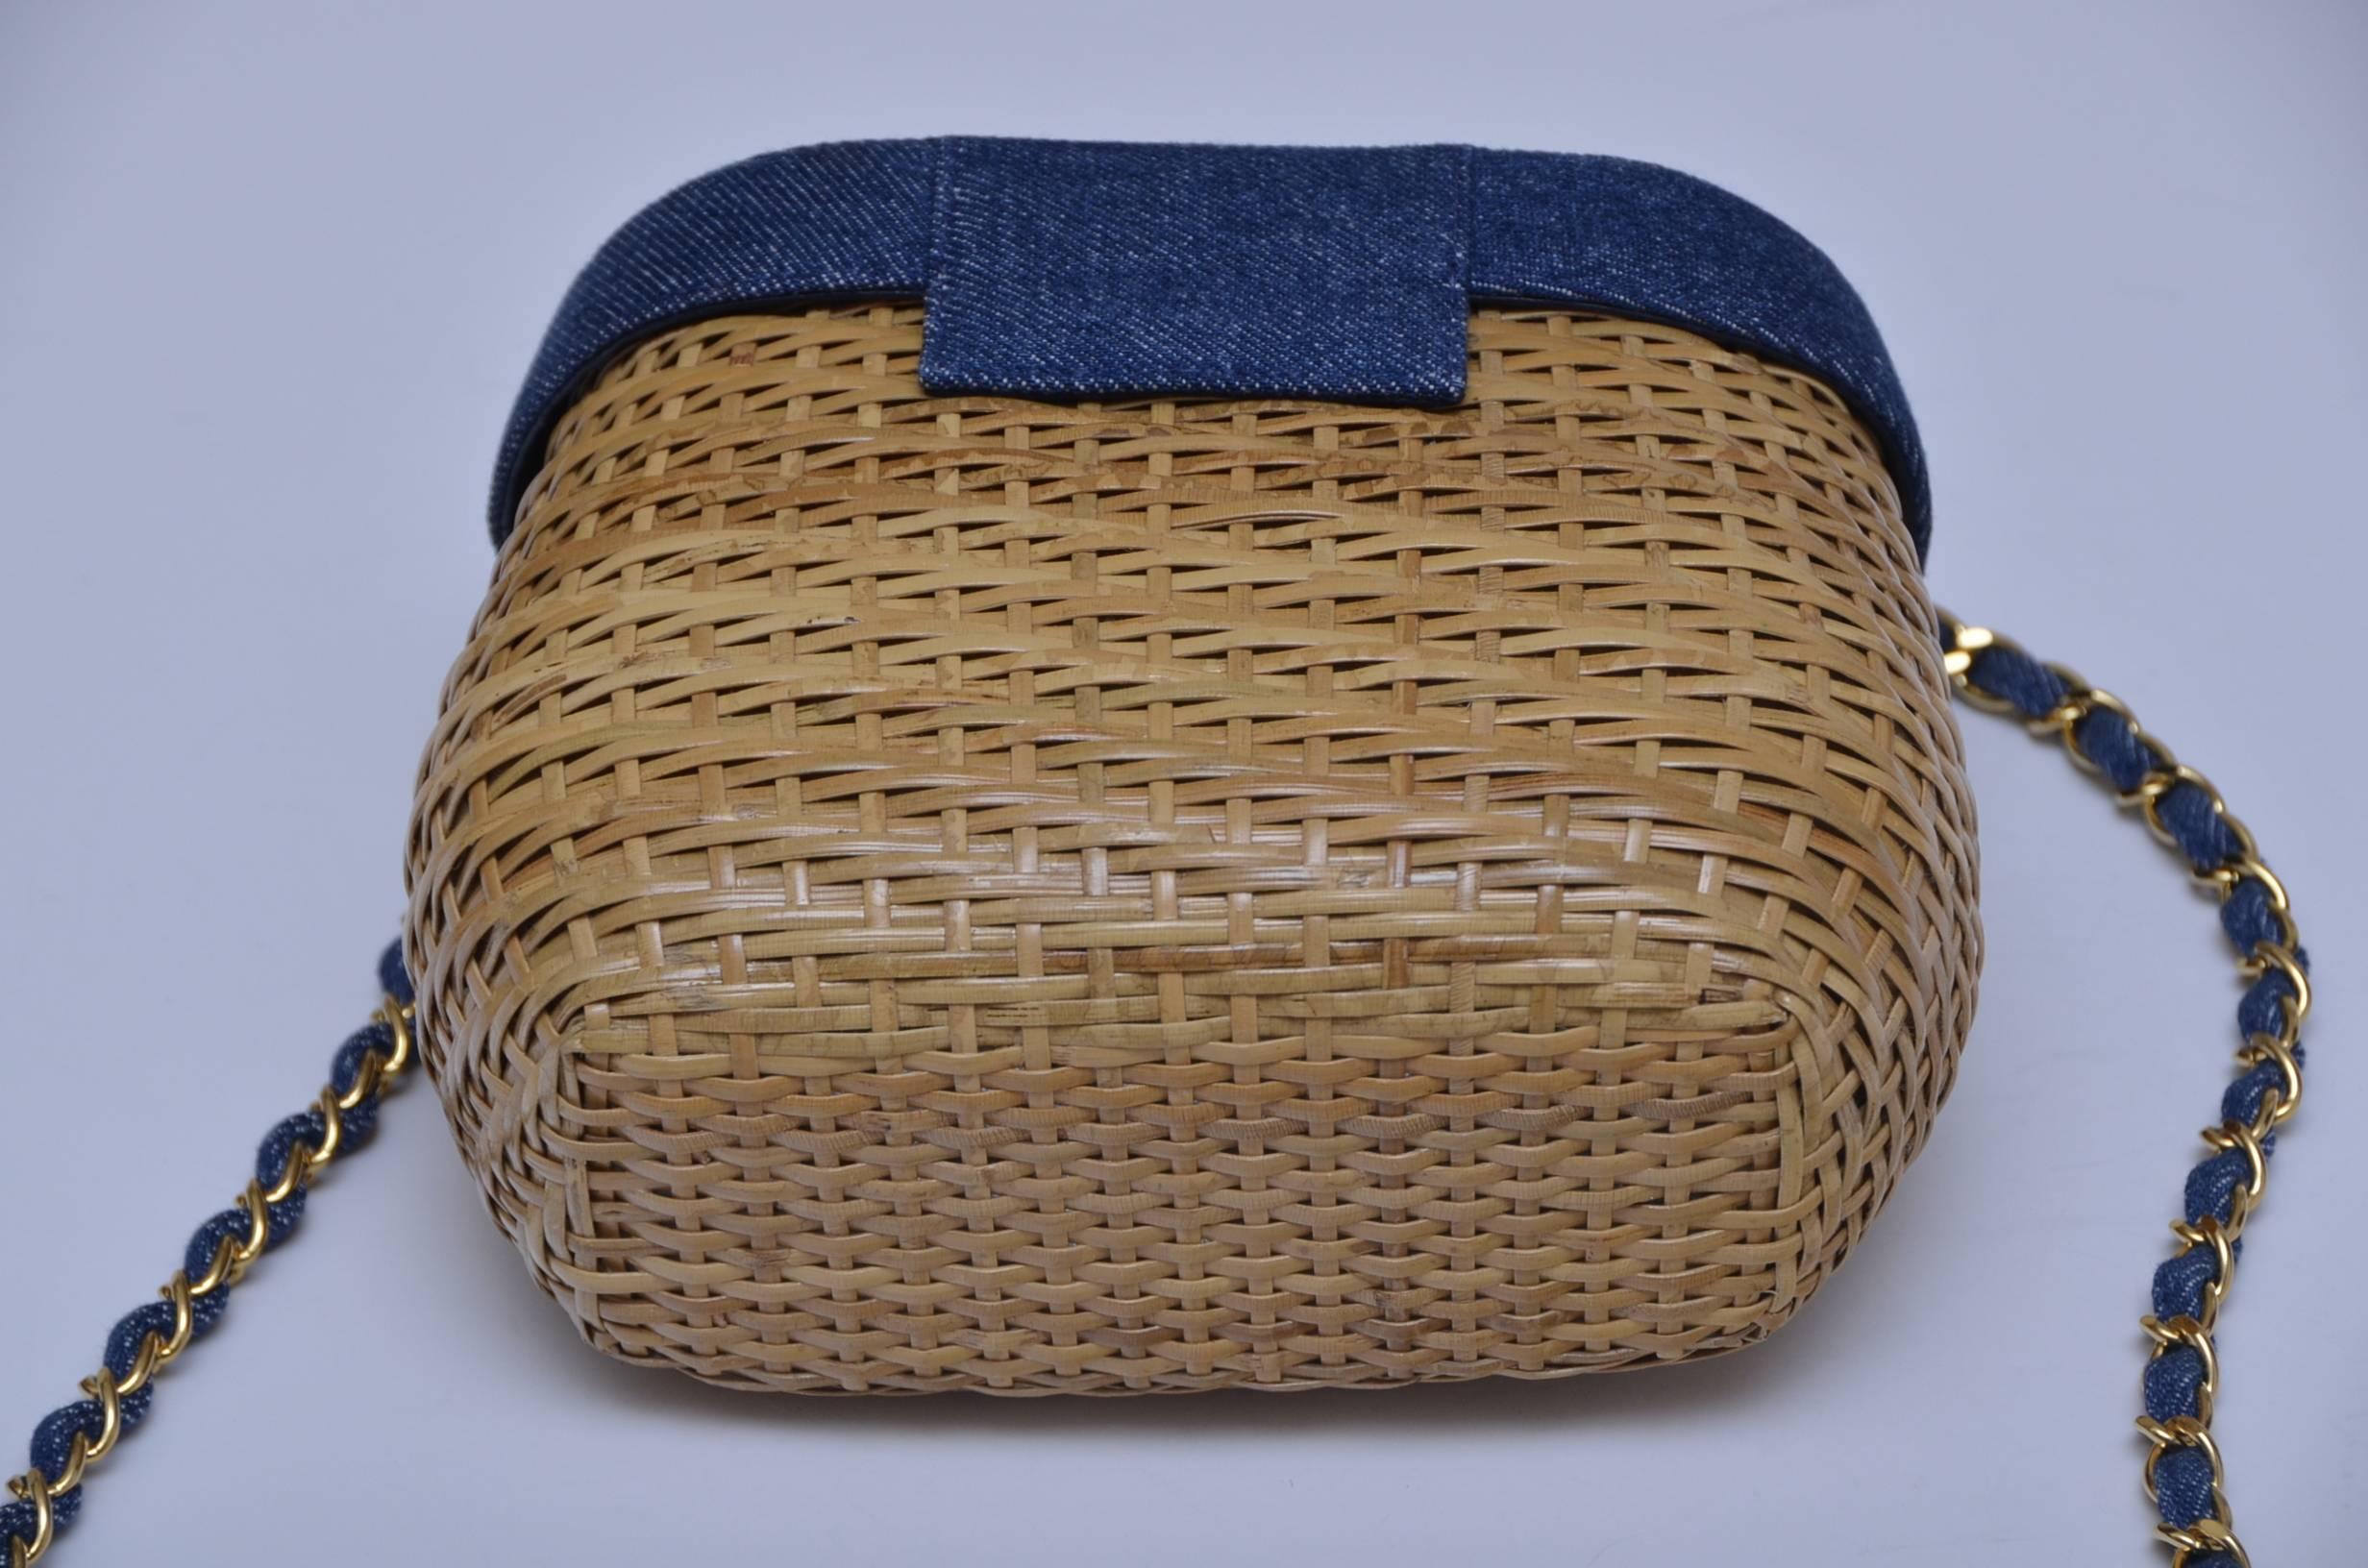 Vintage rare  denim top Chanel wicker handbag.
Excellent mint clean inside out condition.
Comes with a little booklet and card.No dust bag or box.
Very collectible beautiful Chanel handbag and hard to find in this mint condition.Gold tone